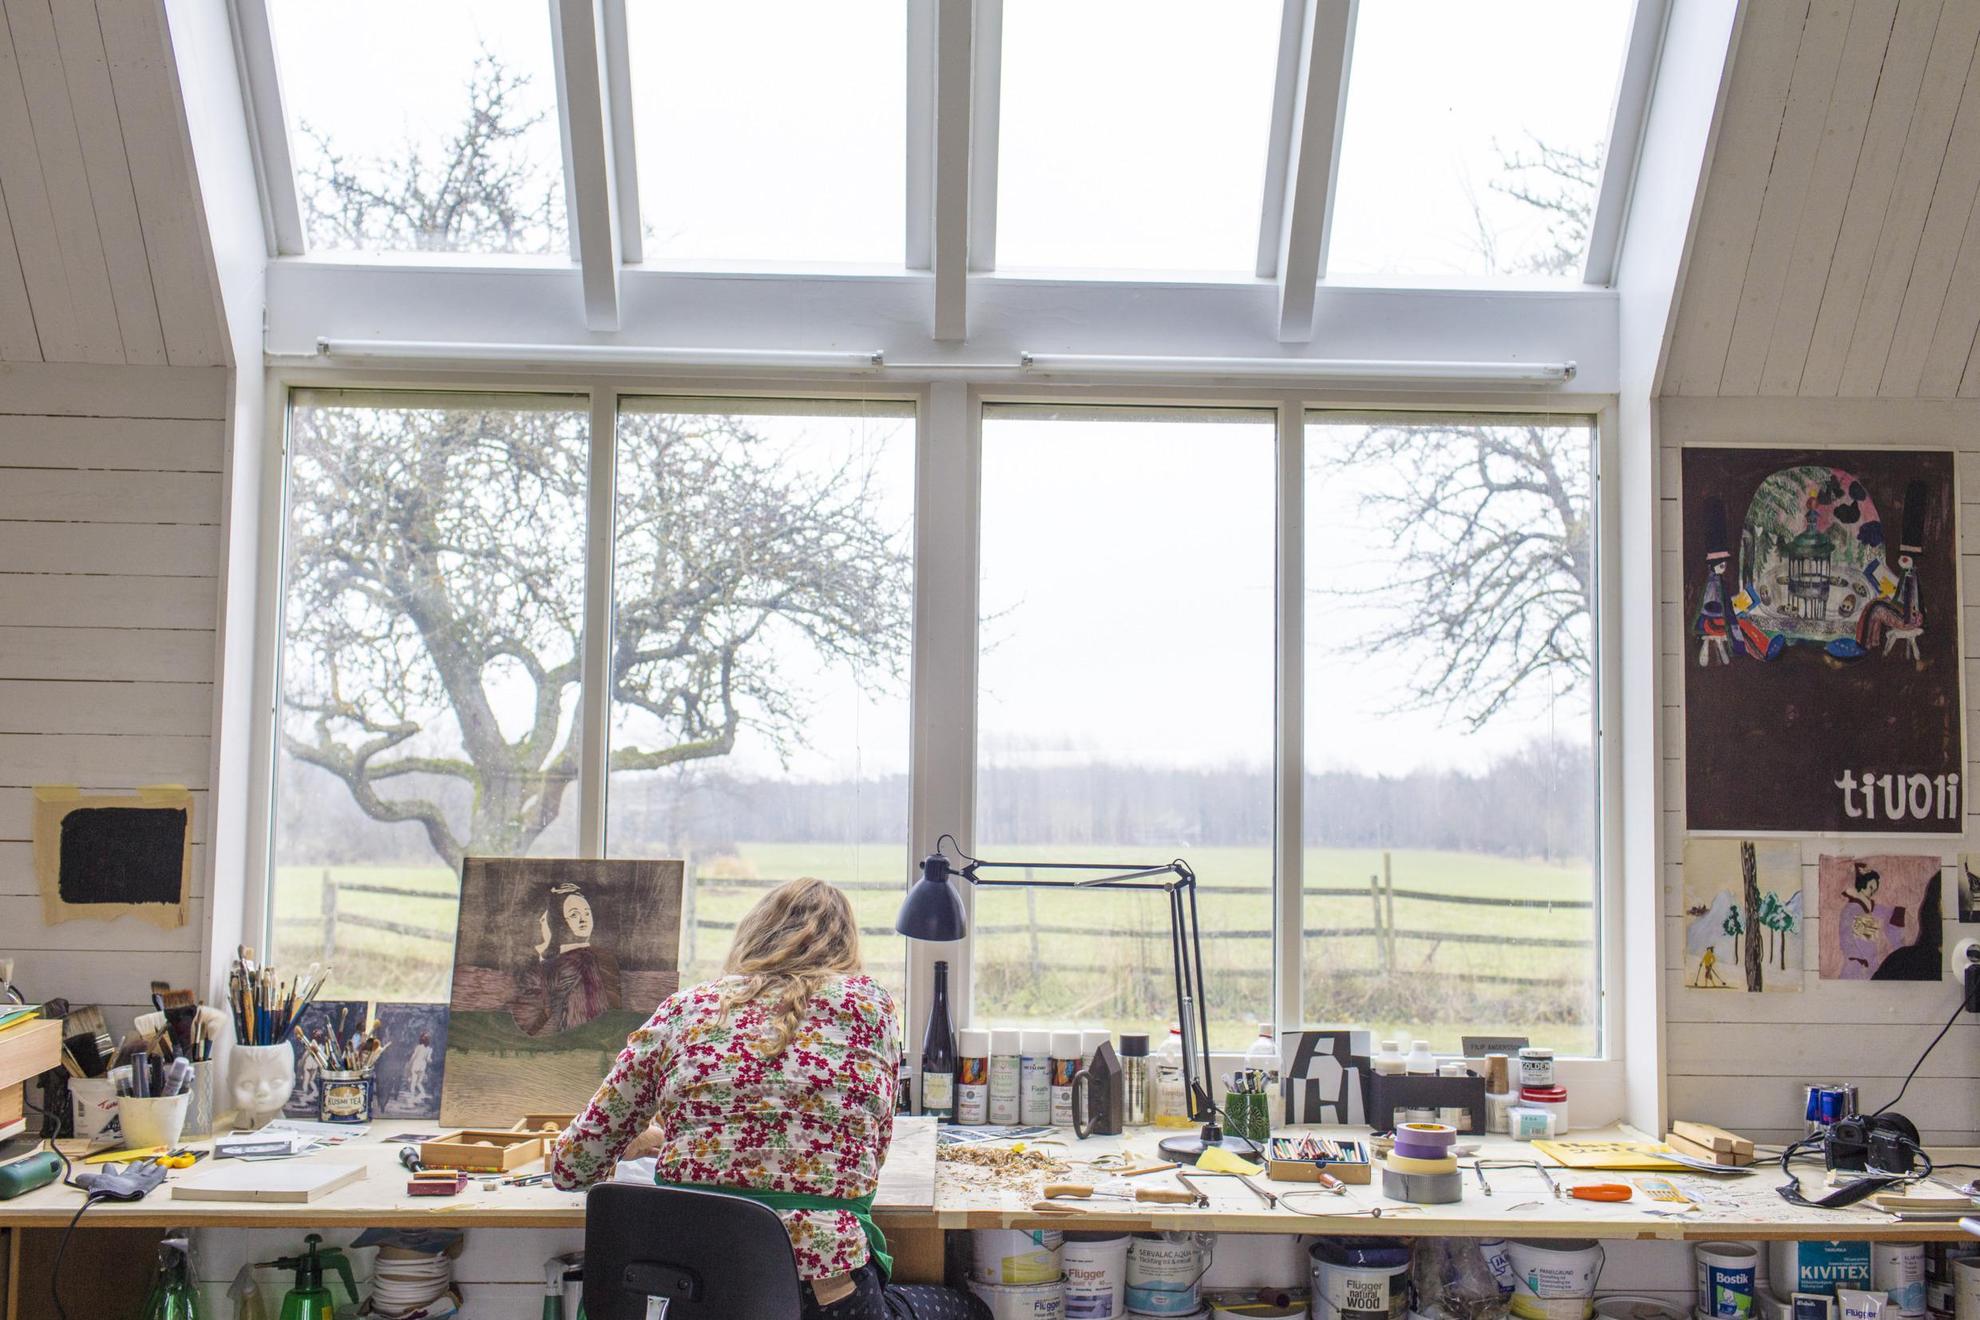 The artist Karin Mamma Andersson is seen from behind sitting at a table in front of large windows, in her studio.